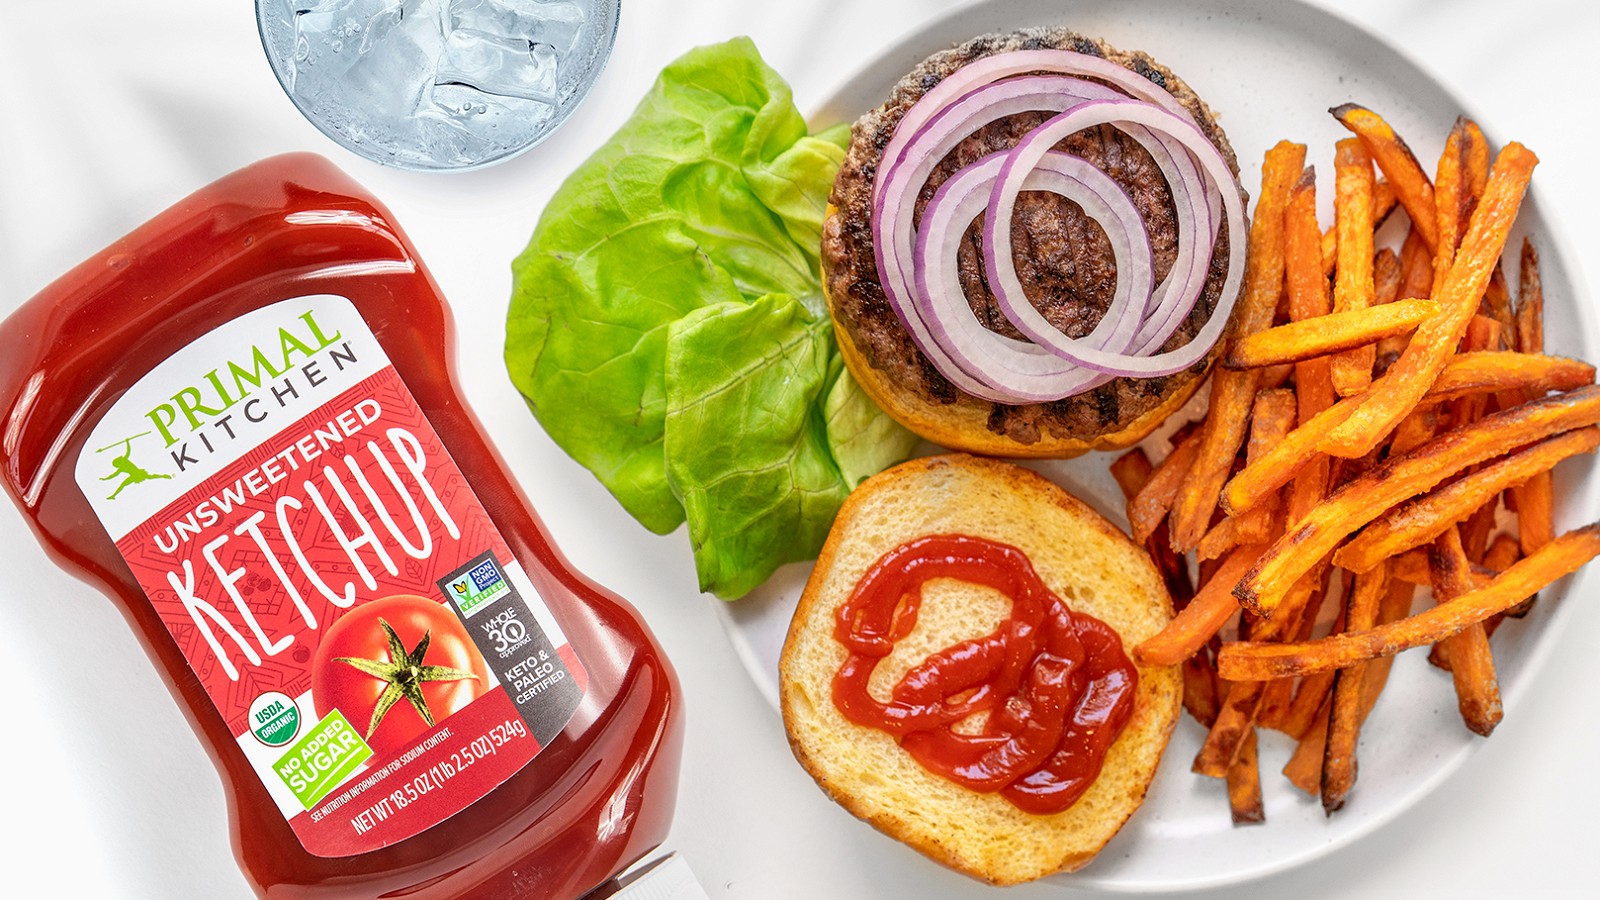 Image of Classic Burger with Ketchup